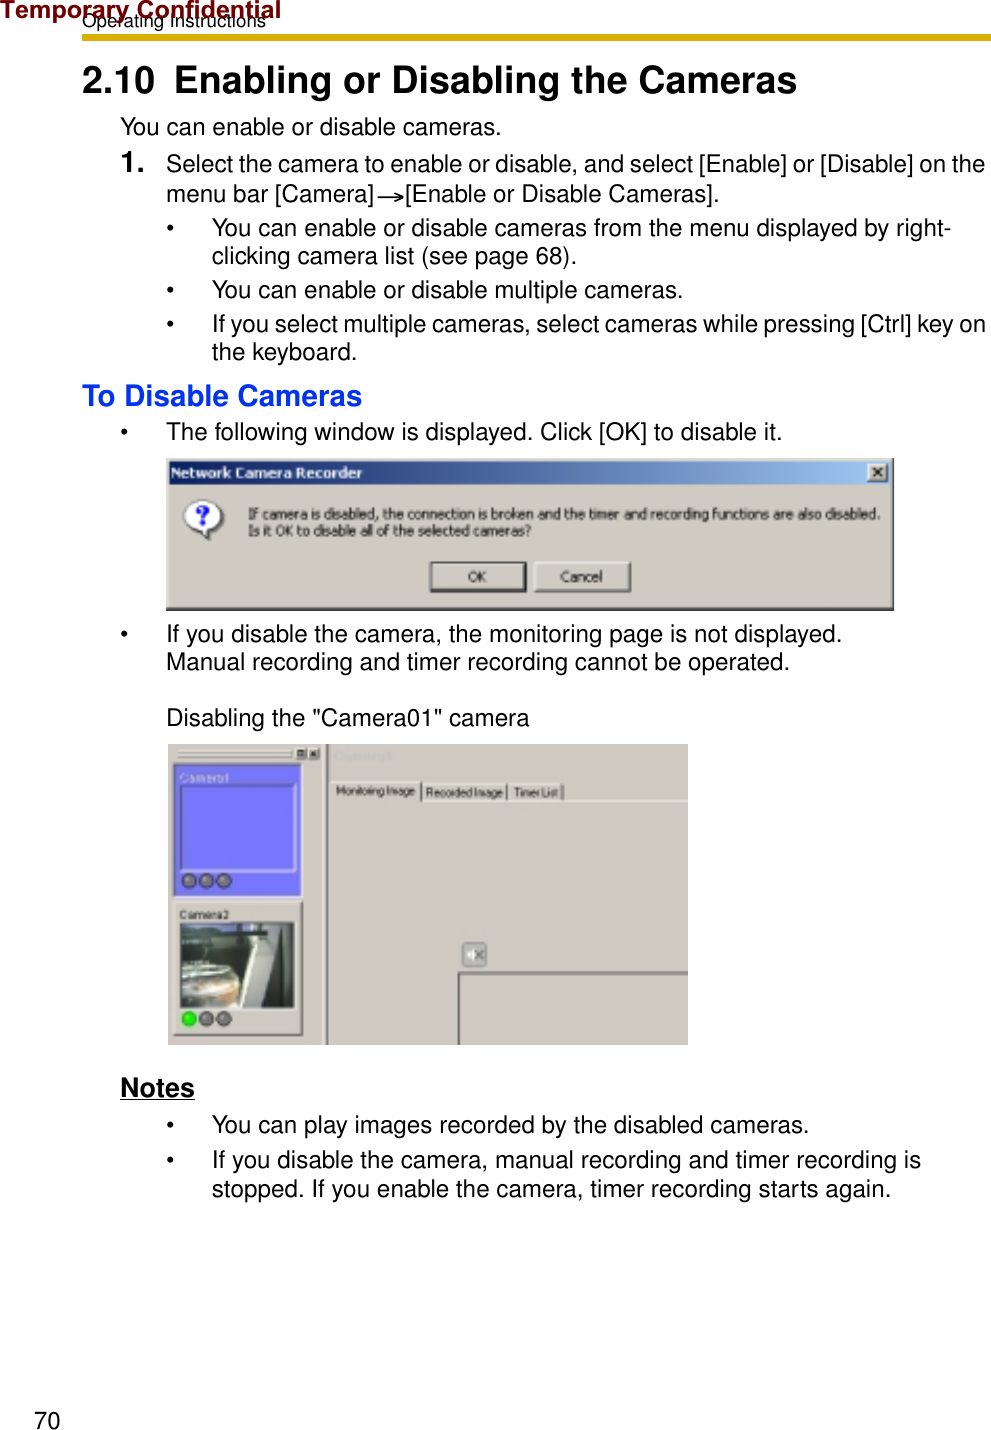 Operating Instructions702.10 Enabling or Disabling the CamerasYou can enable or disable cameras.1. Select the camera to enable or disable, and select [Enable] or [Disable] on the menu bar [Camera] [Enable or Disable Cameras].• You can enable or disable cameras from the menu displayed by right-clicking camera list (see page 68).• You can enable or disable multiple cameras.• If you select multiple cameras, select cameras while pressing [Ctrl] key on the keyboard.To Disable Cameras• The following window is displayed. Click [OK] to disable it.• If you disable the camera, the monitoring page is not displayed. Manual recording and timer recording cannot be operated. Disabling the &quot;Camera01&quot; cameraNotes• You can play images recorded by the disabled cameras.• If you disable the camera, manual recording and timer recording is stopped. If you enable the camera, timer recording starts again.Temporary Confidential